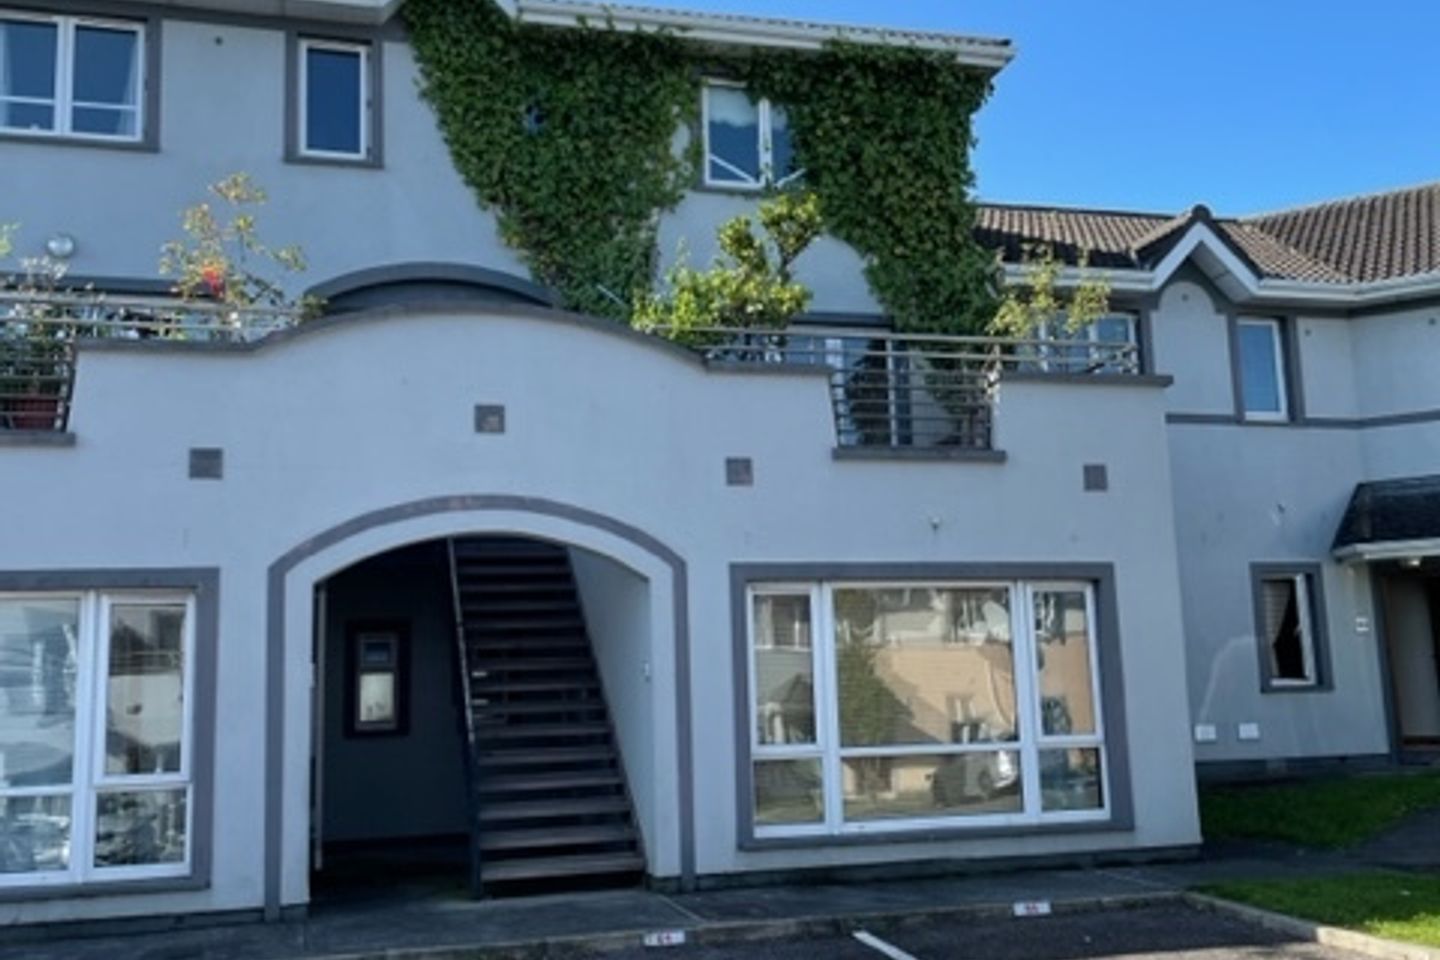 62 Fairway Heights, Tralee, Co. Kerry, V92HN53